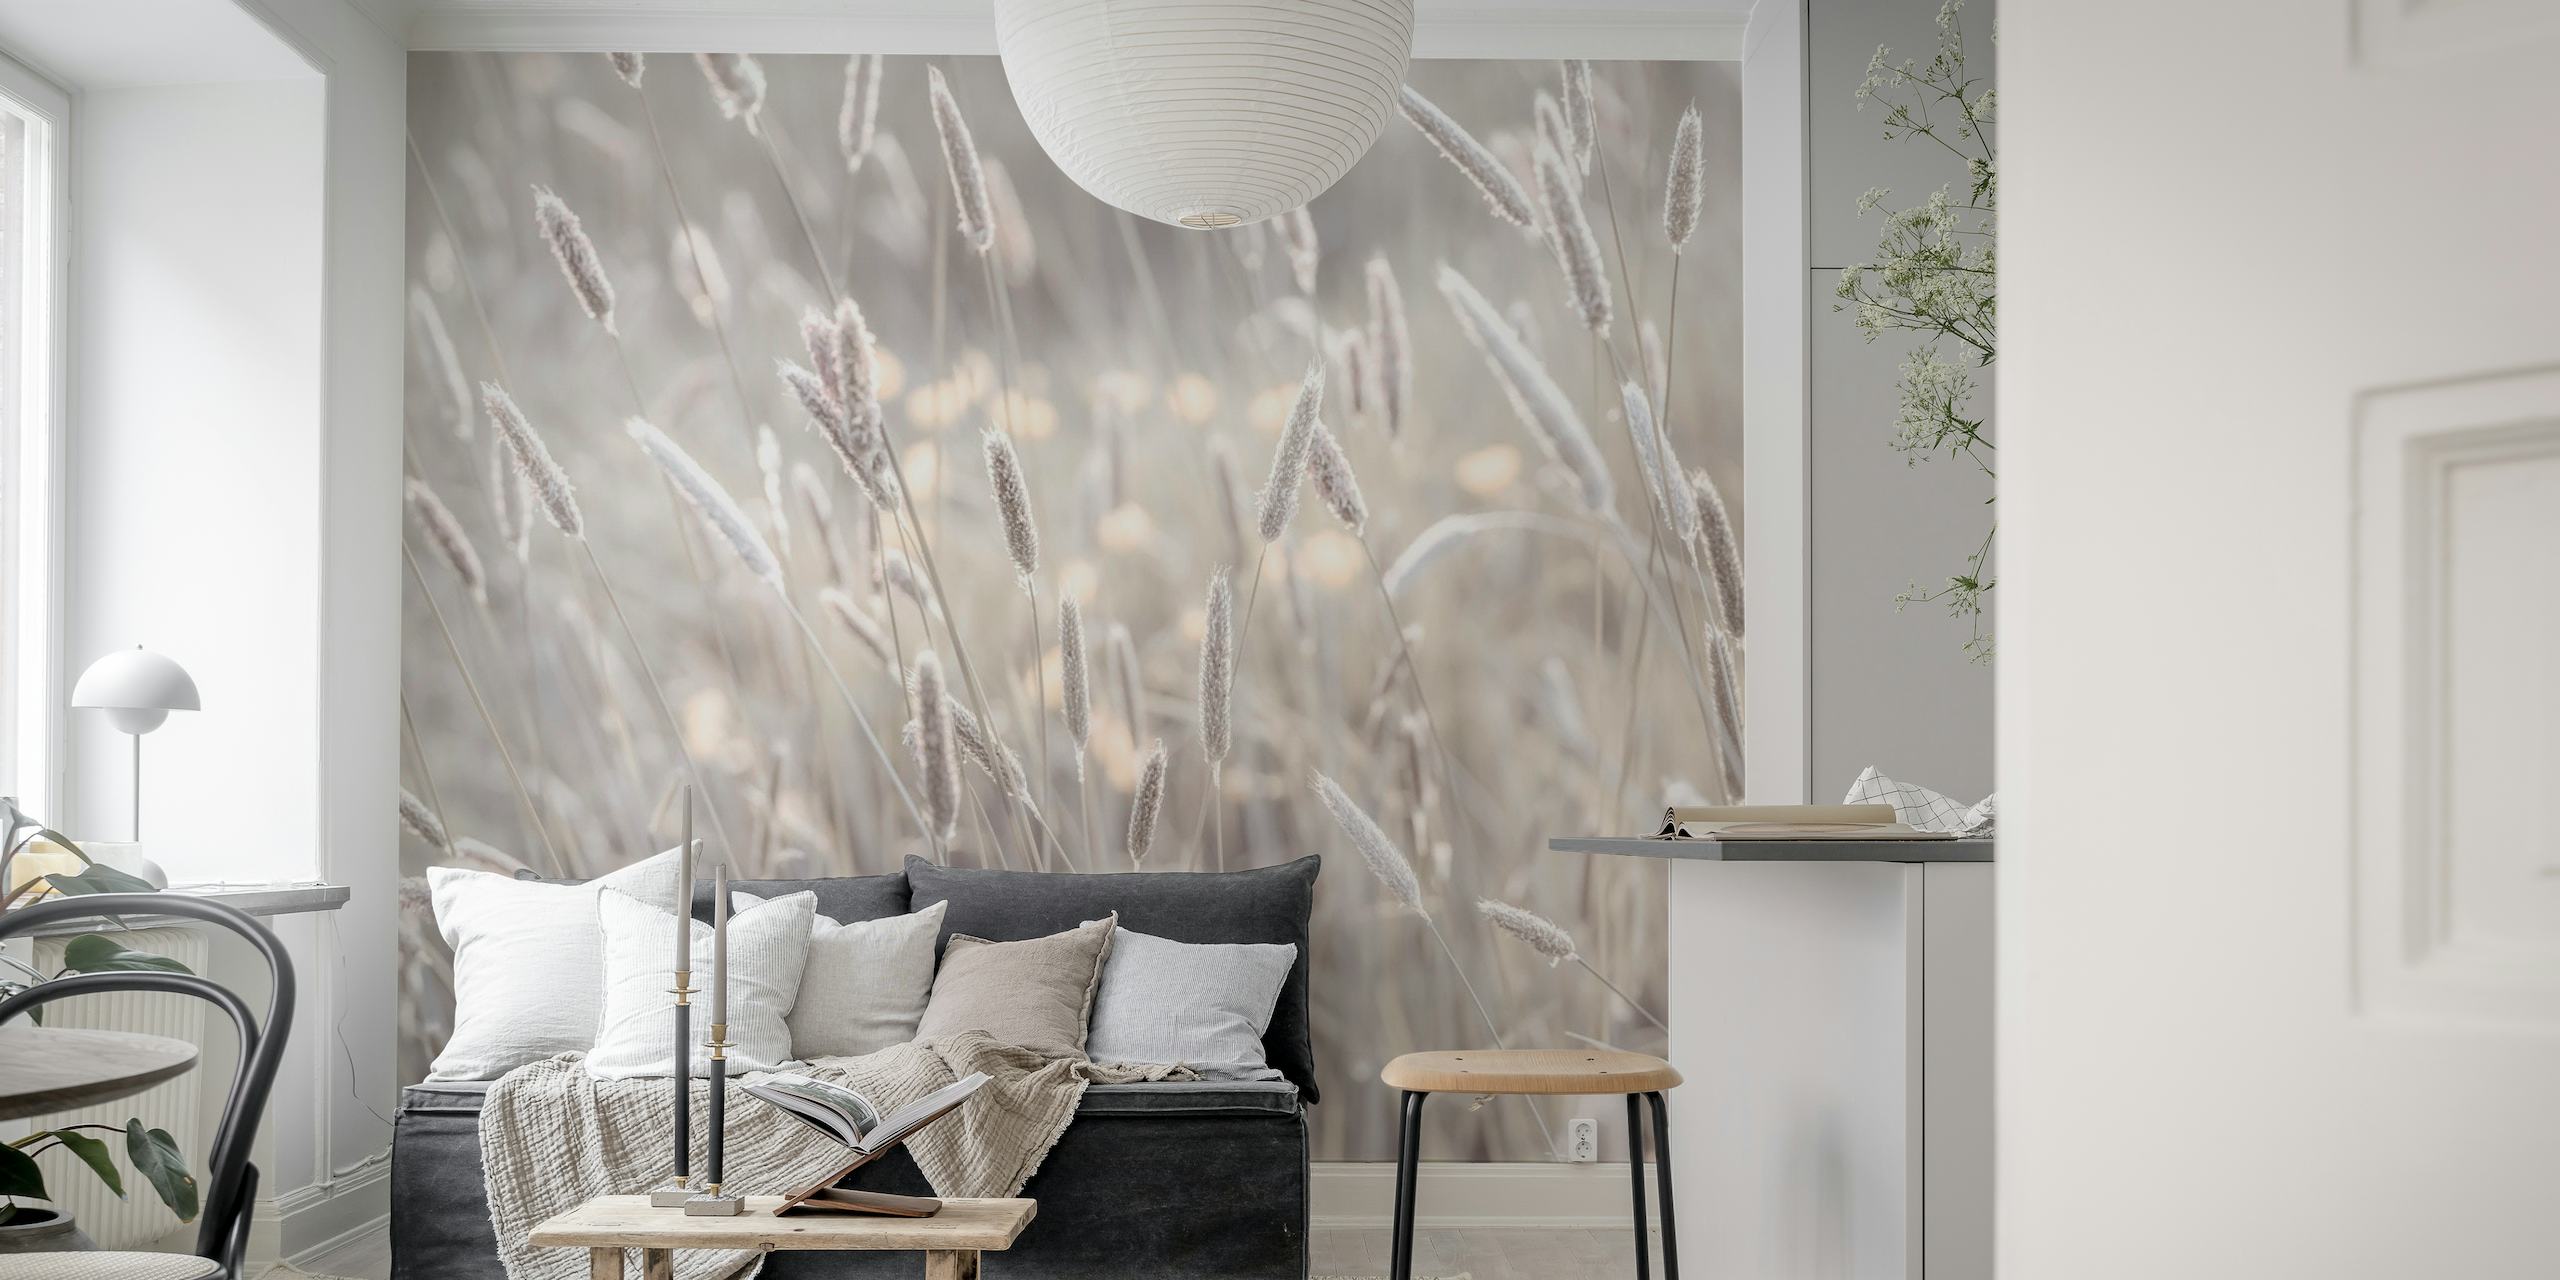 Meadow's Bliss wall mural with soft gray and off-white hues, showcasing serene meadow imagery